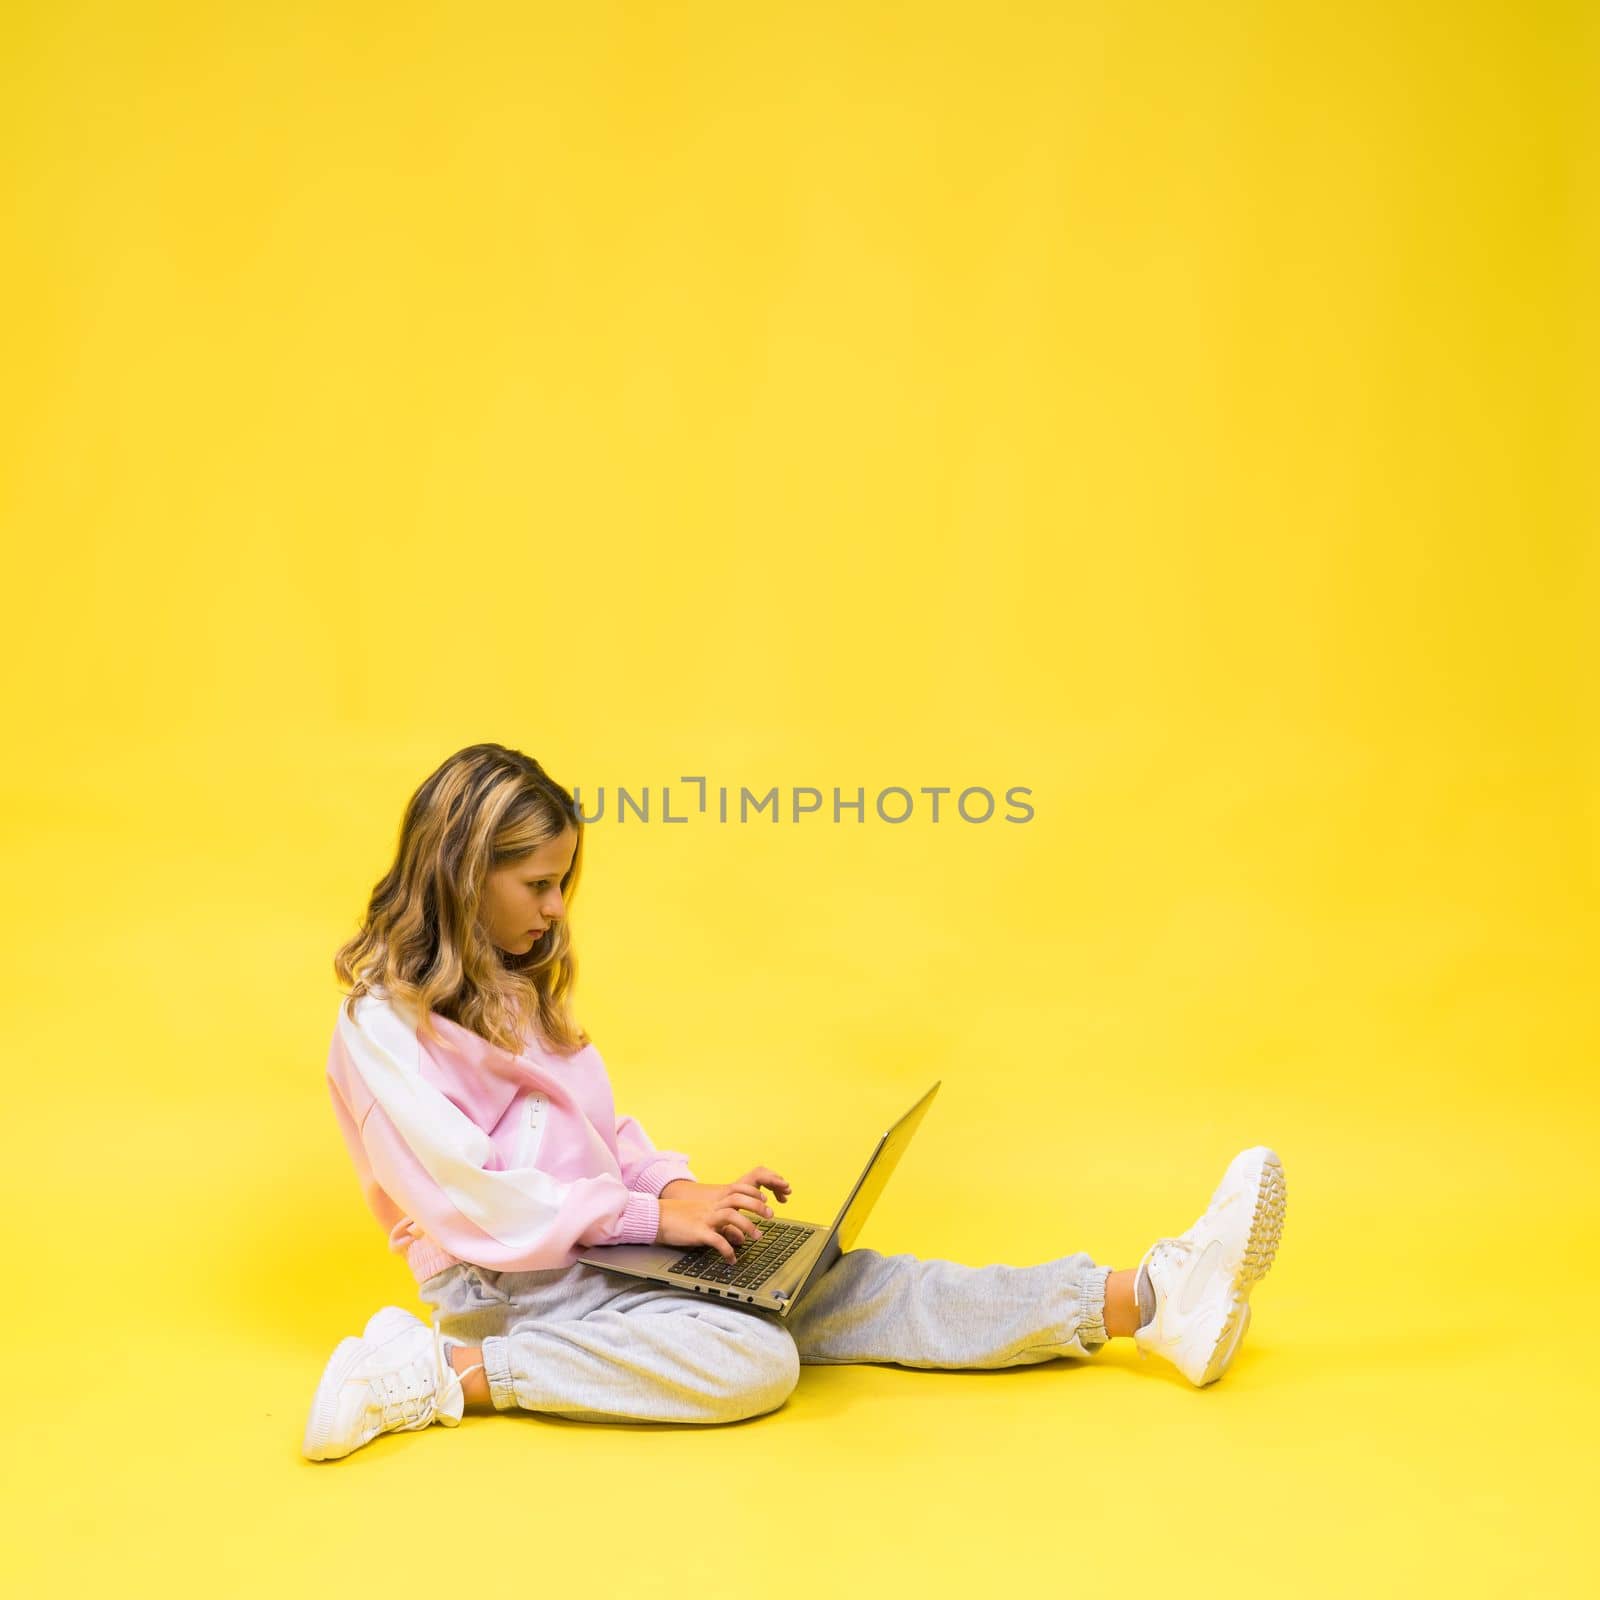 Beautiful little girl sitting on light floor with a gray laptop and smiling, empty space